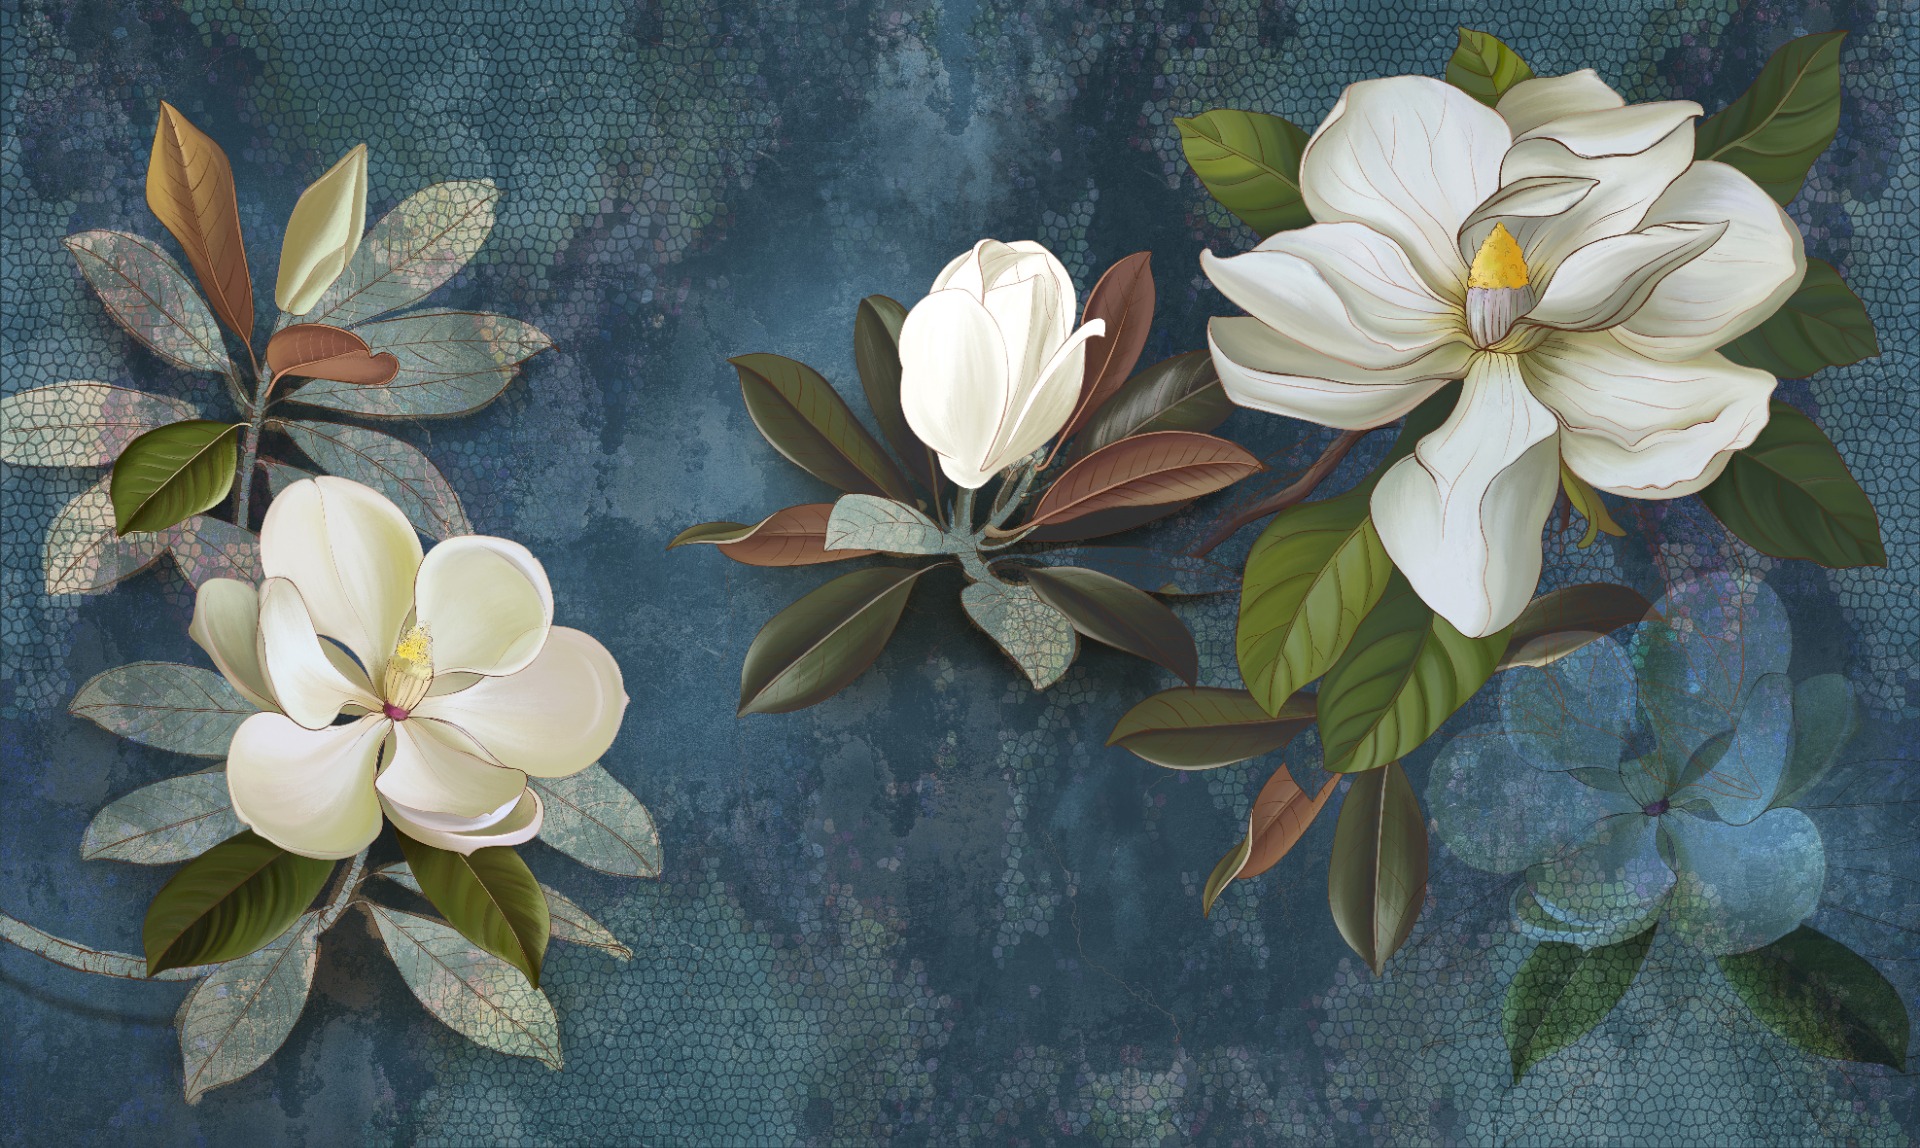 Illustrated different flowers mural wallpaper  TenStickers